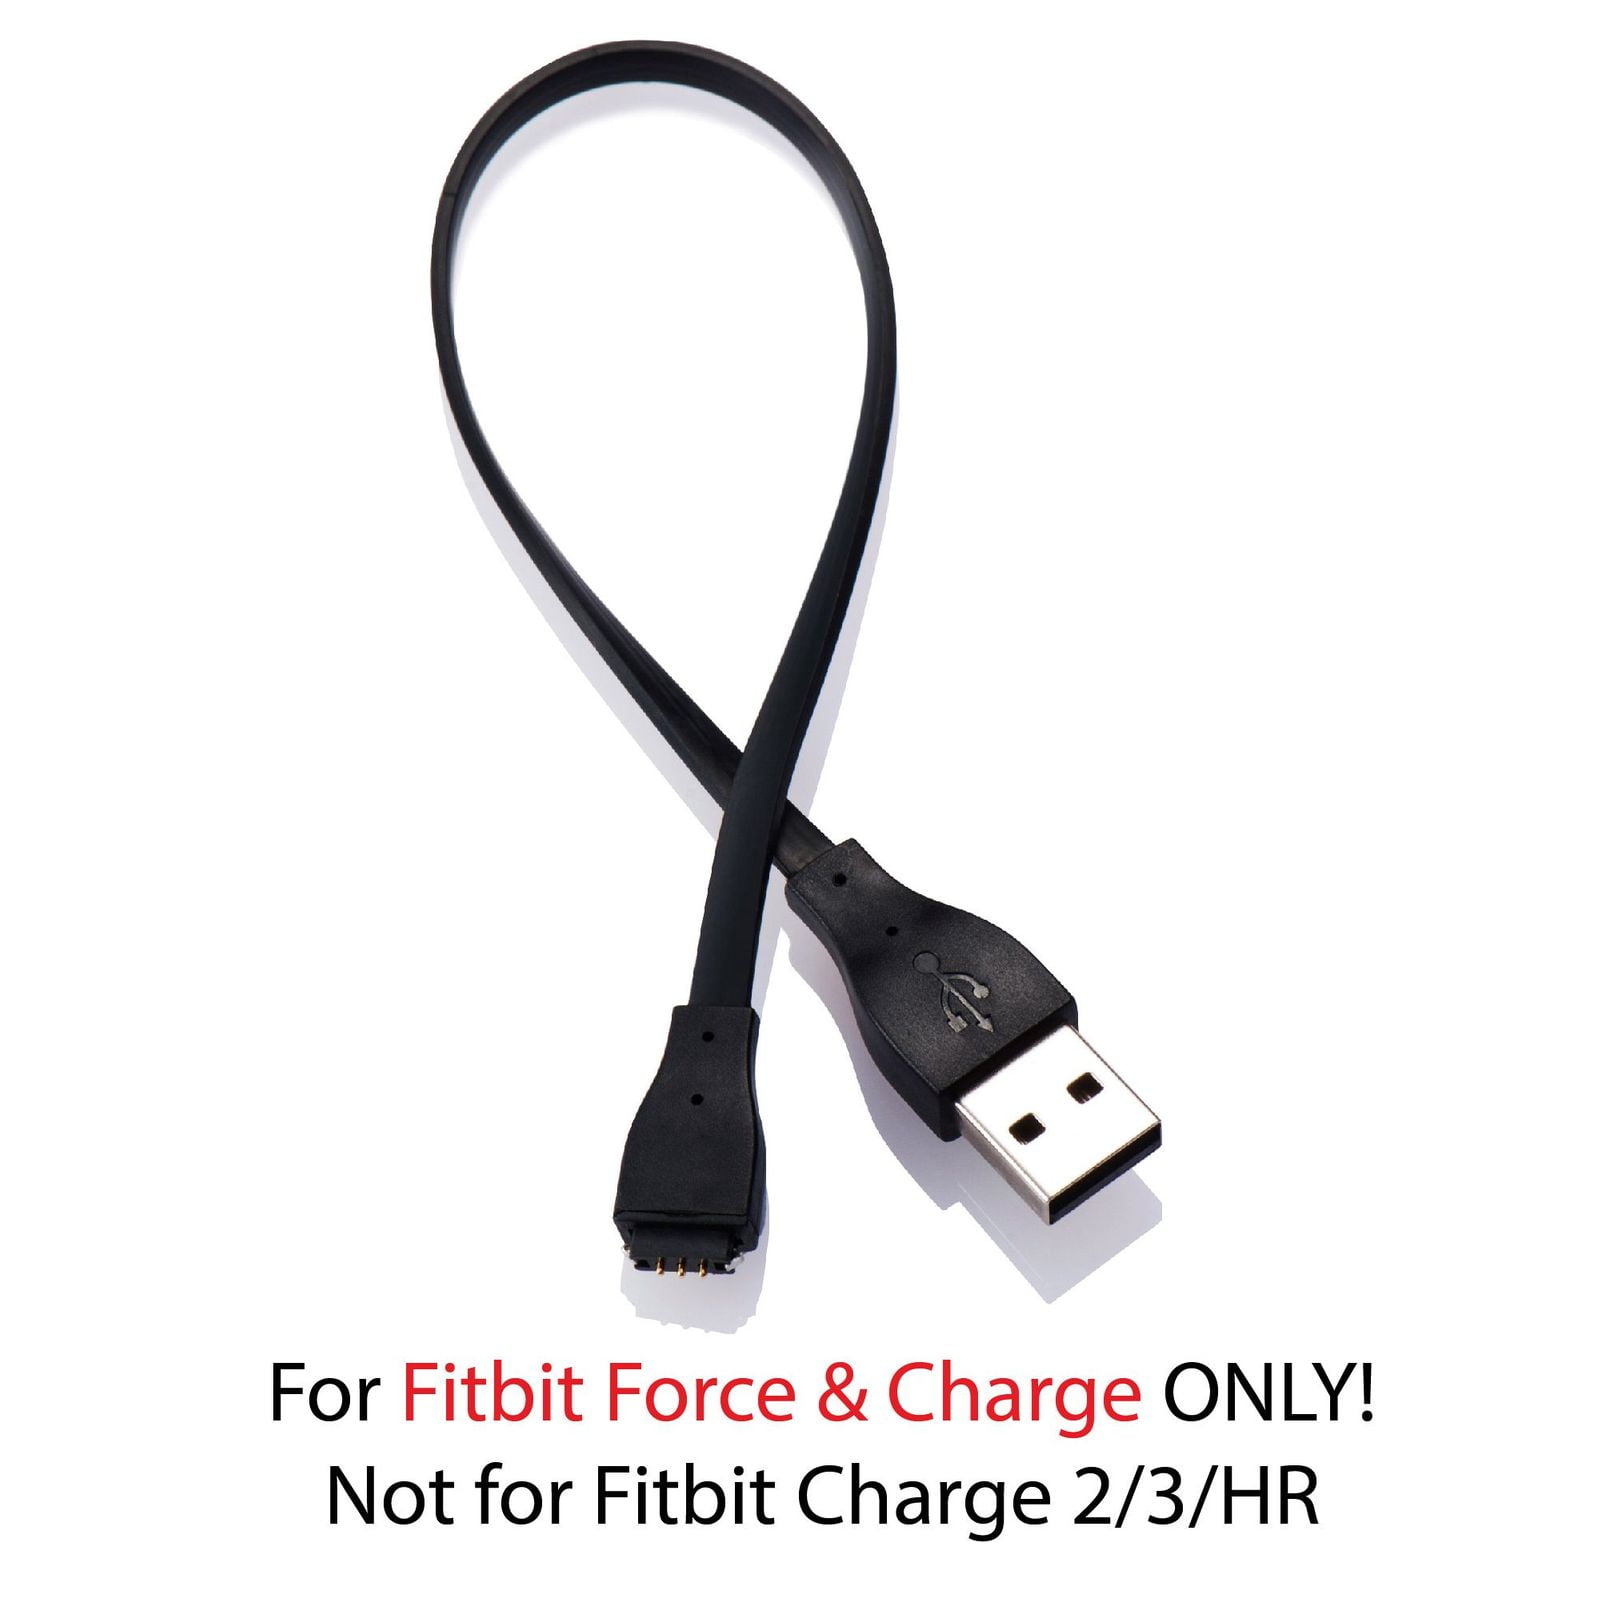 3x USB Power Charging Cable Cord Replacement for Fitbit Force Wrist Band Charger 